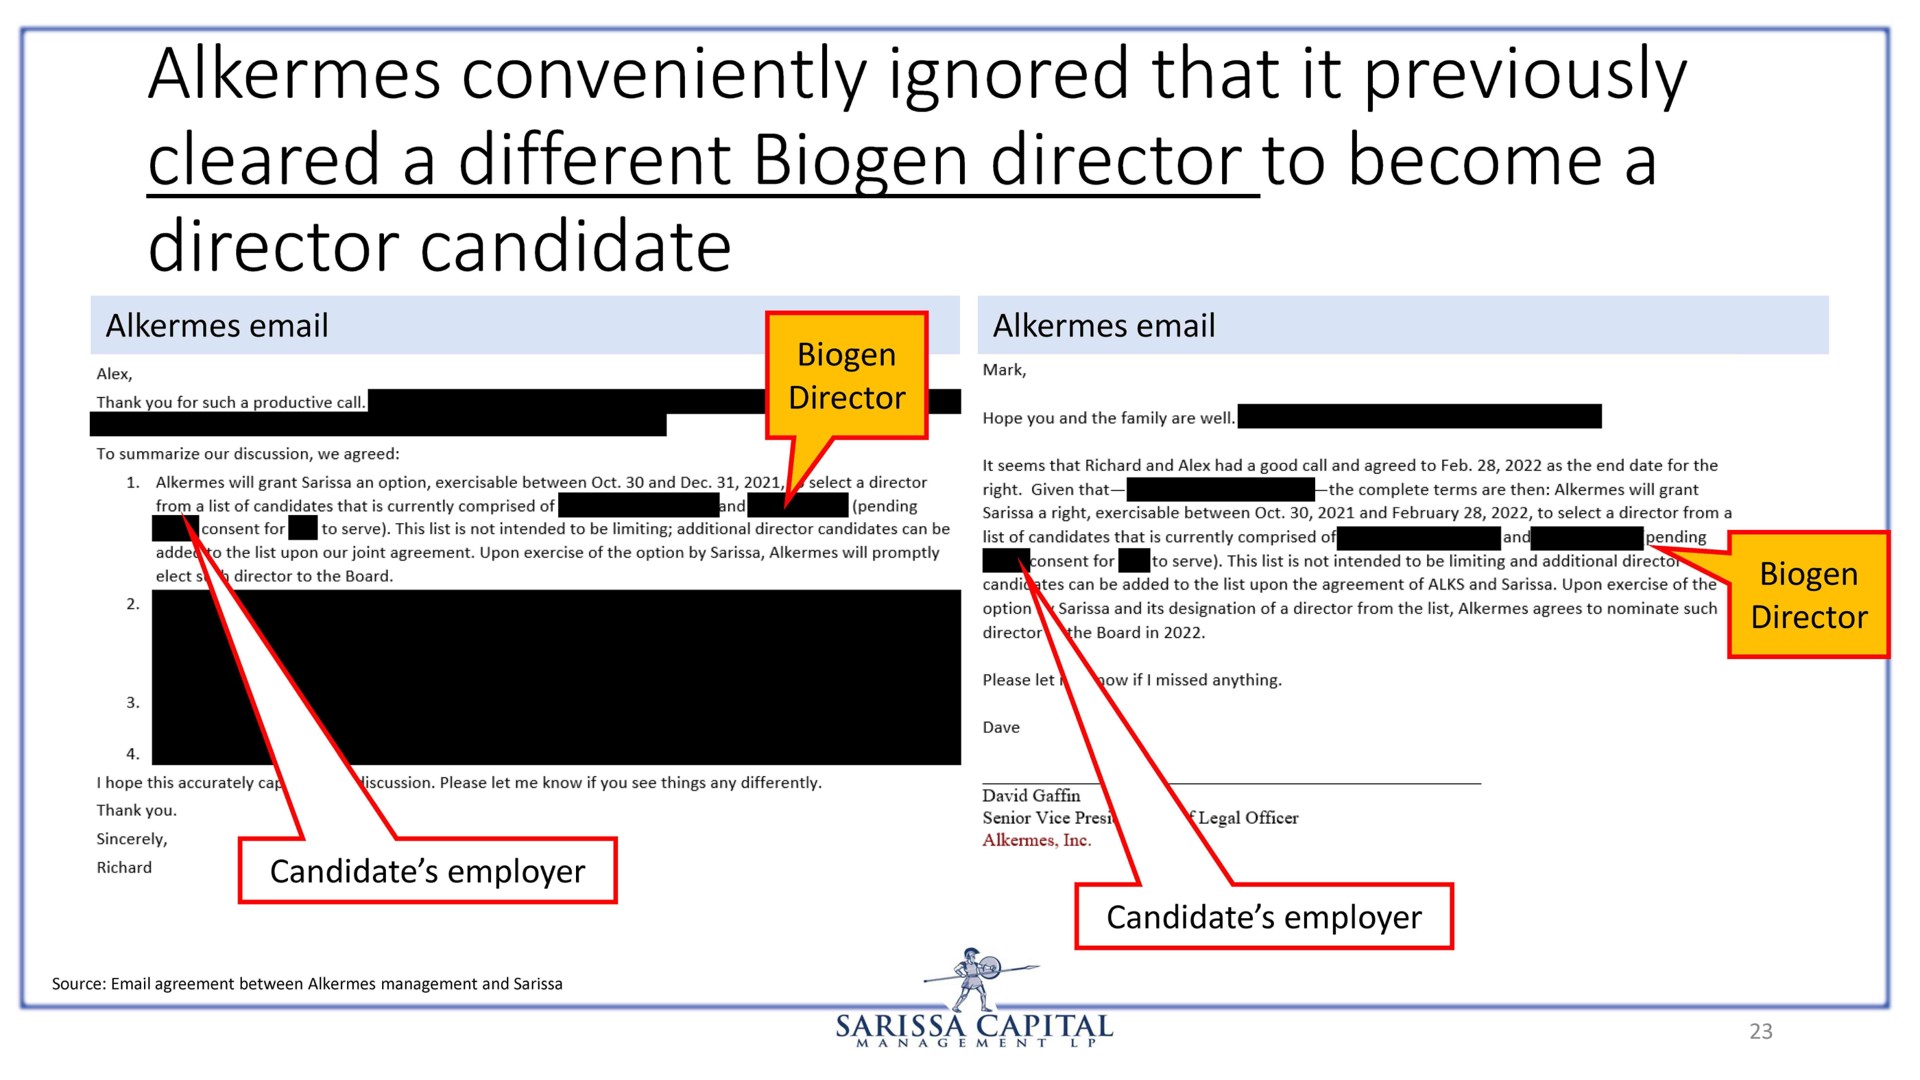 alkermes conveniently ignored that it previously cleared a different biogen director to become a director candidate | Sarissa Capital